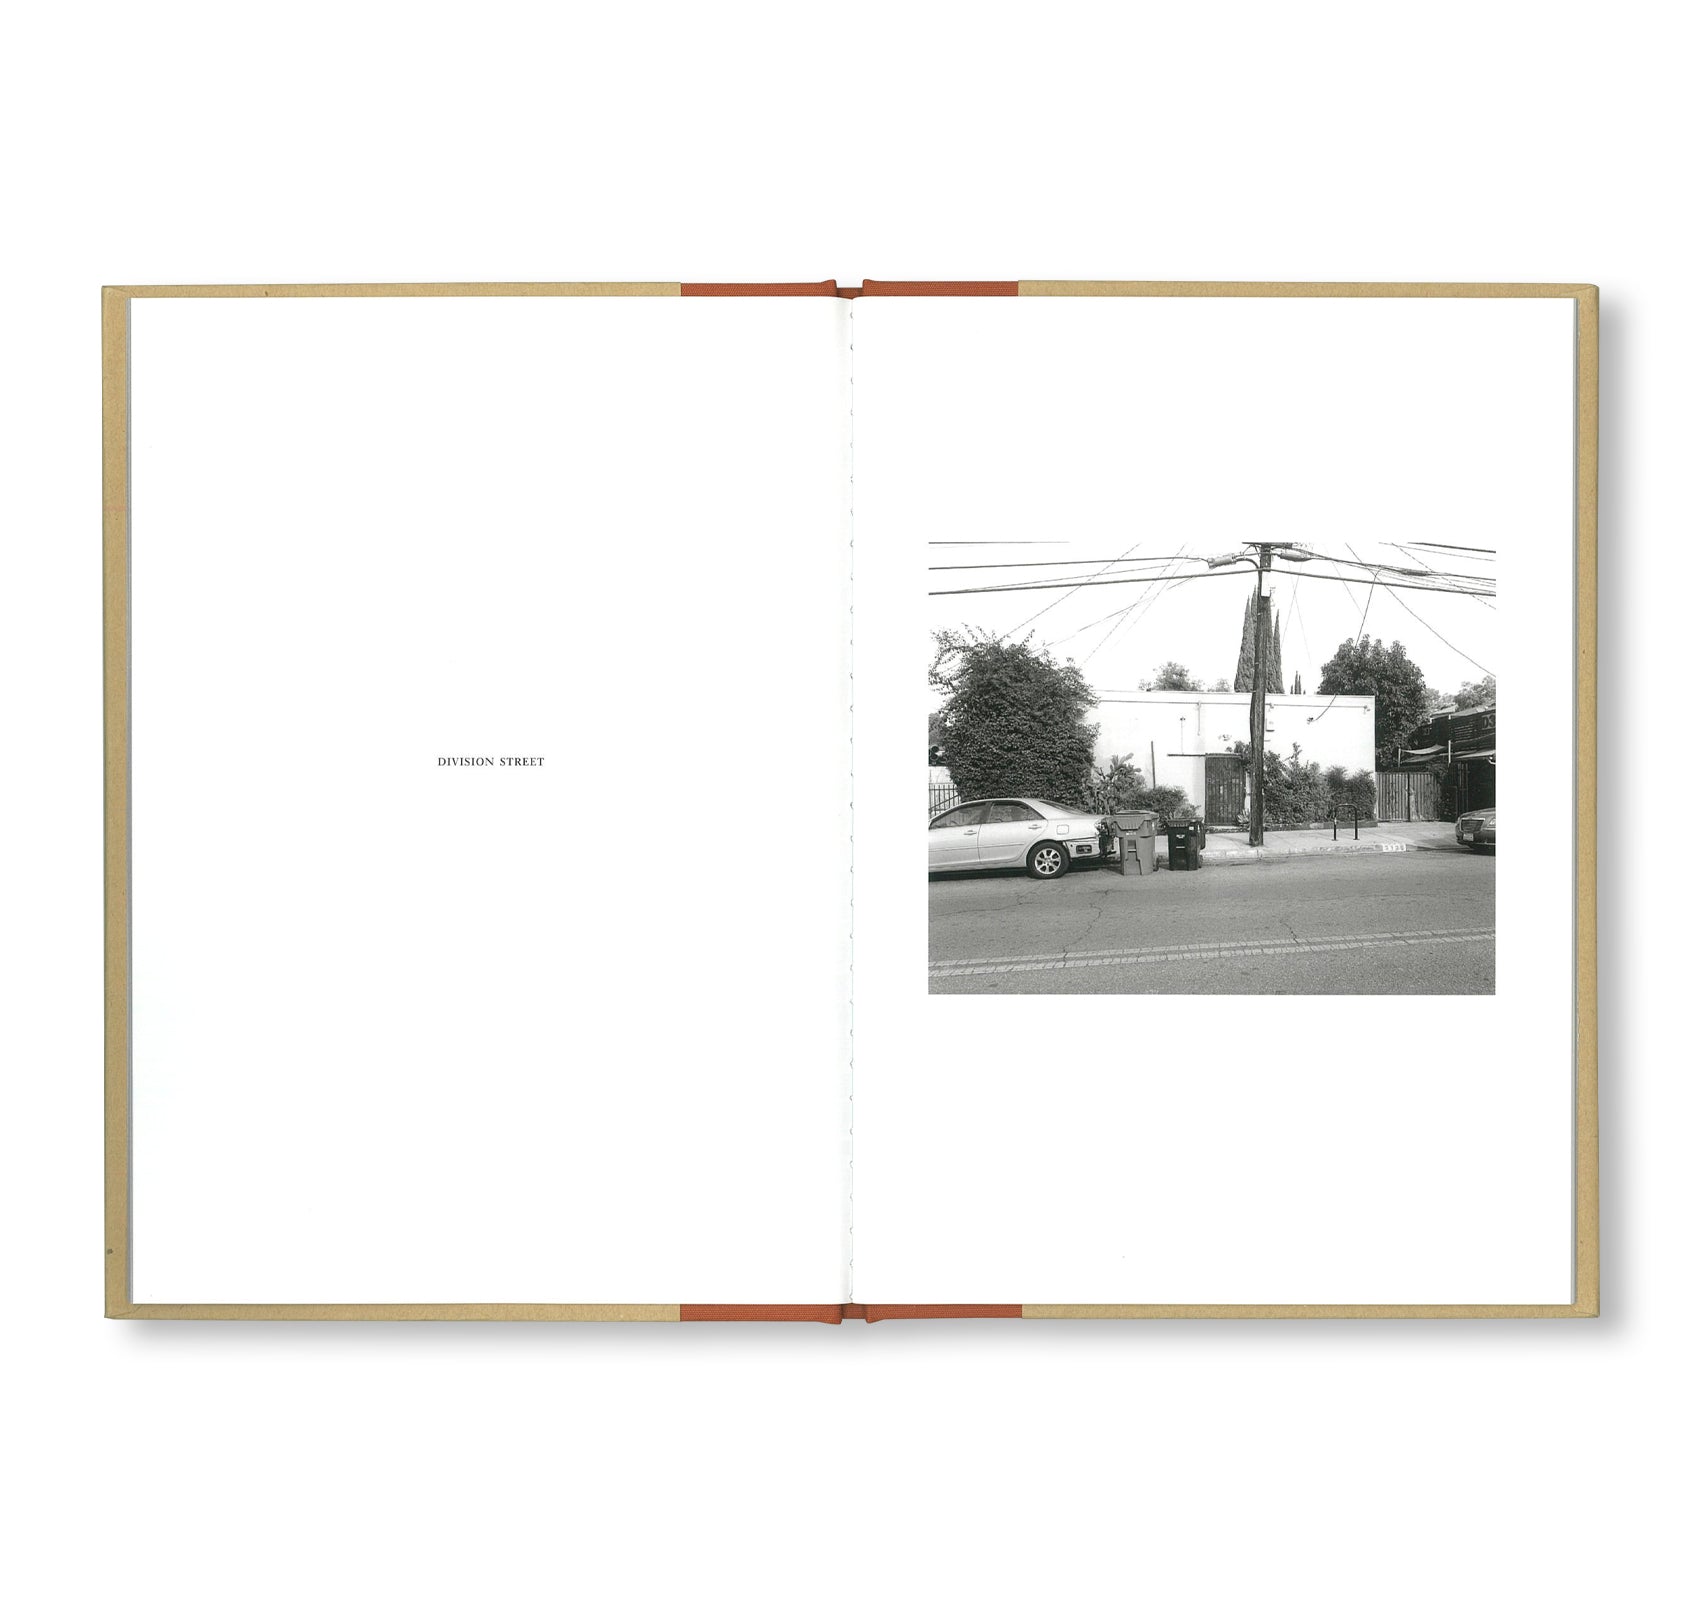 ONE PICTURE BOOK TWO #05: STUDIO E.R. by Mark Ruwedel